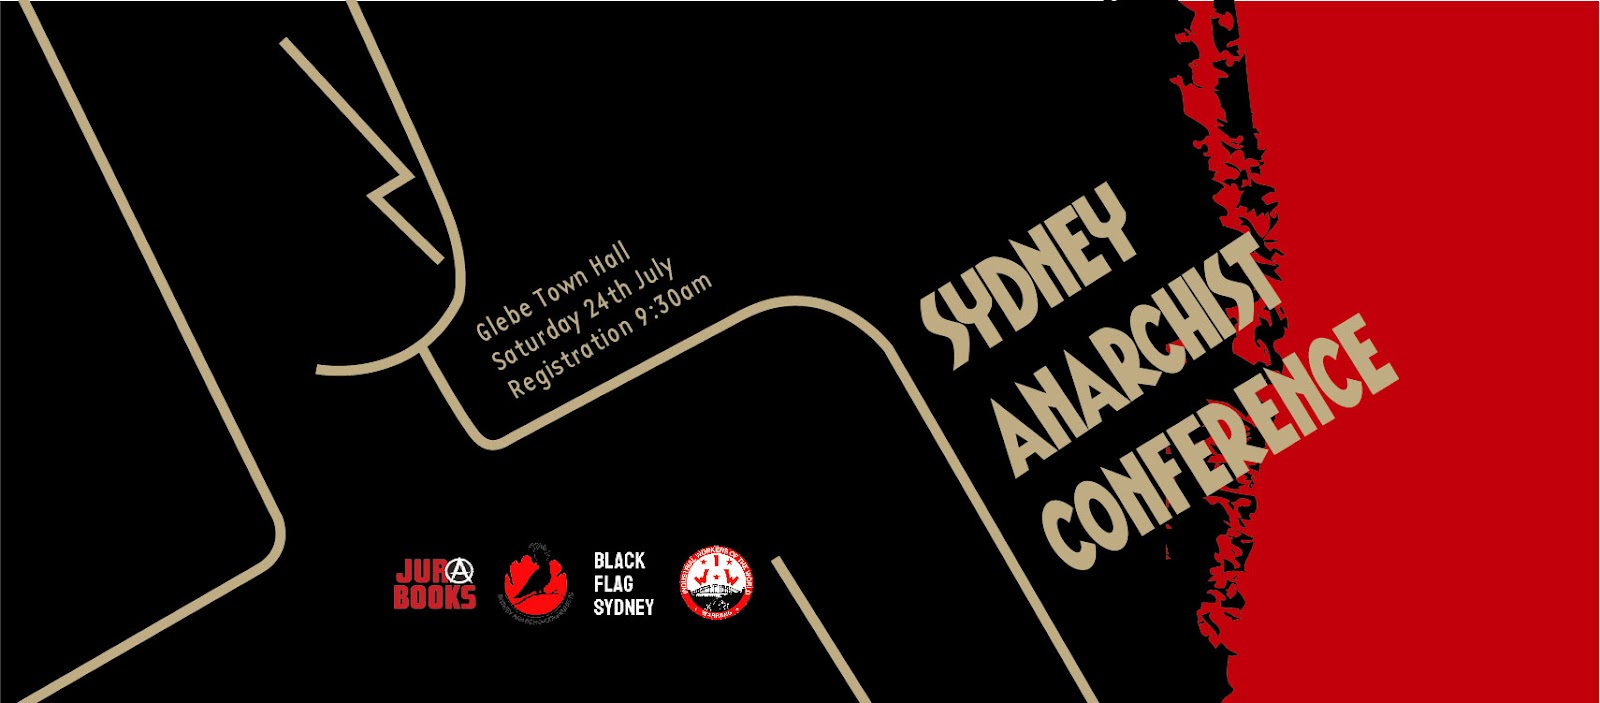 Graphic for an anarchist conference in Sydney featuring an outline of a person on a red and black background